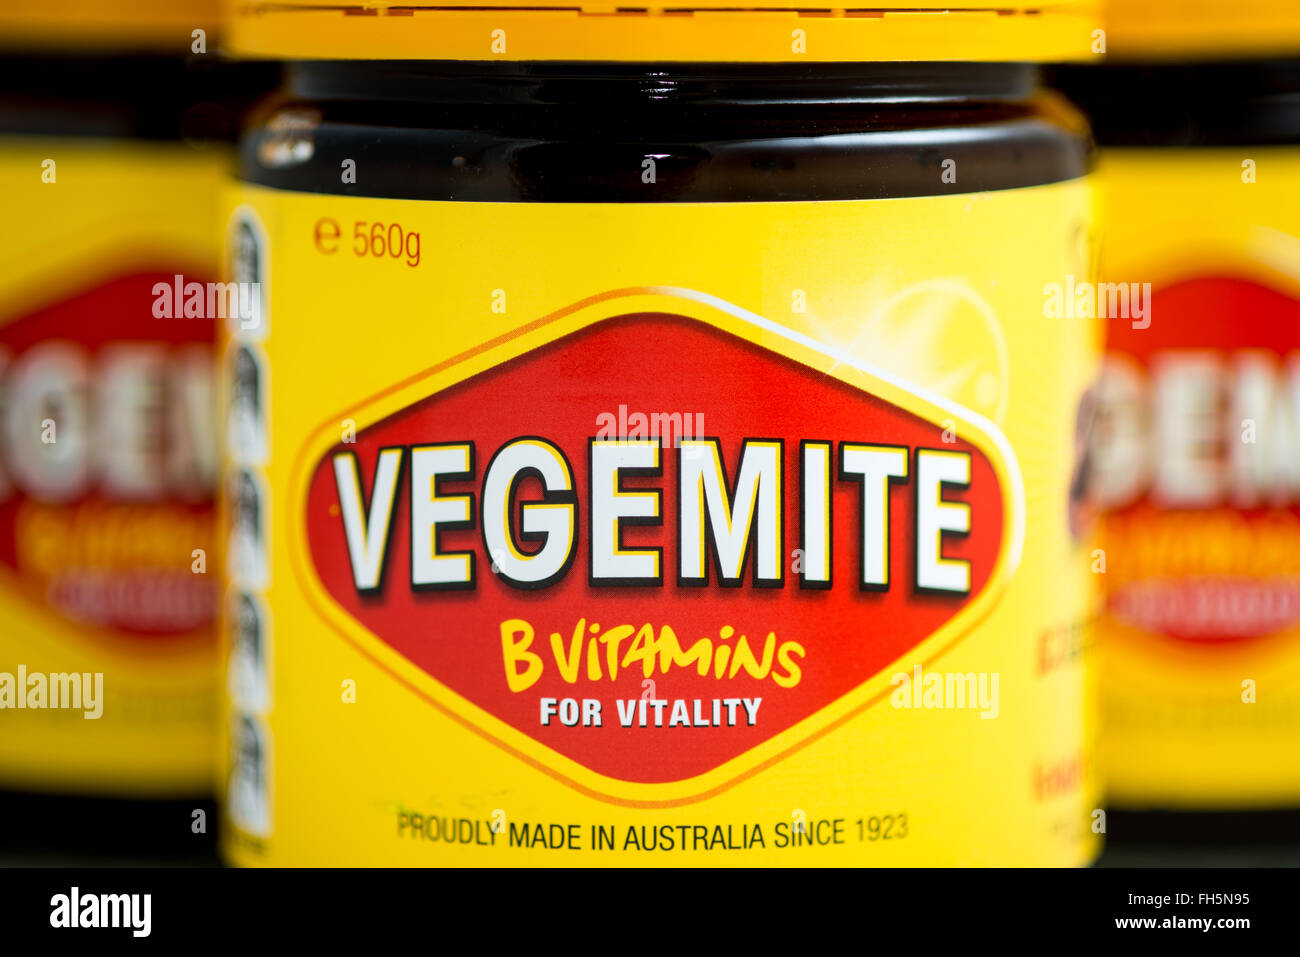 Vegemite is a dark brown Australian food paste made from brewers' yeast extract with various vegetable and spice additives. it was developed by Cyril P. Callister in Melbourne, Victoria, in 1922, as a locally sourced version of the British paste Marmite. It  has become a cultural icon. It is often put on toast. Stock Photo